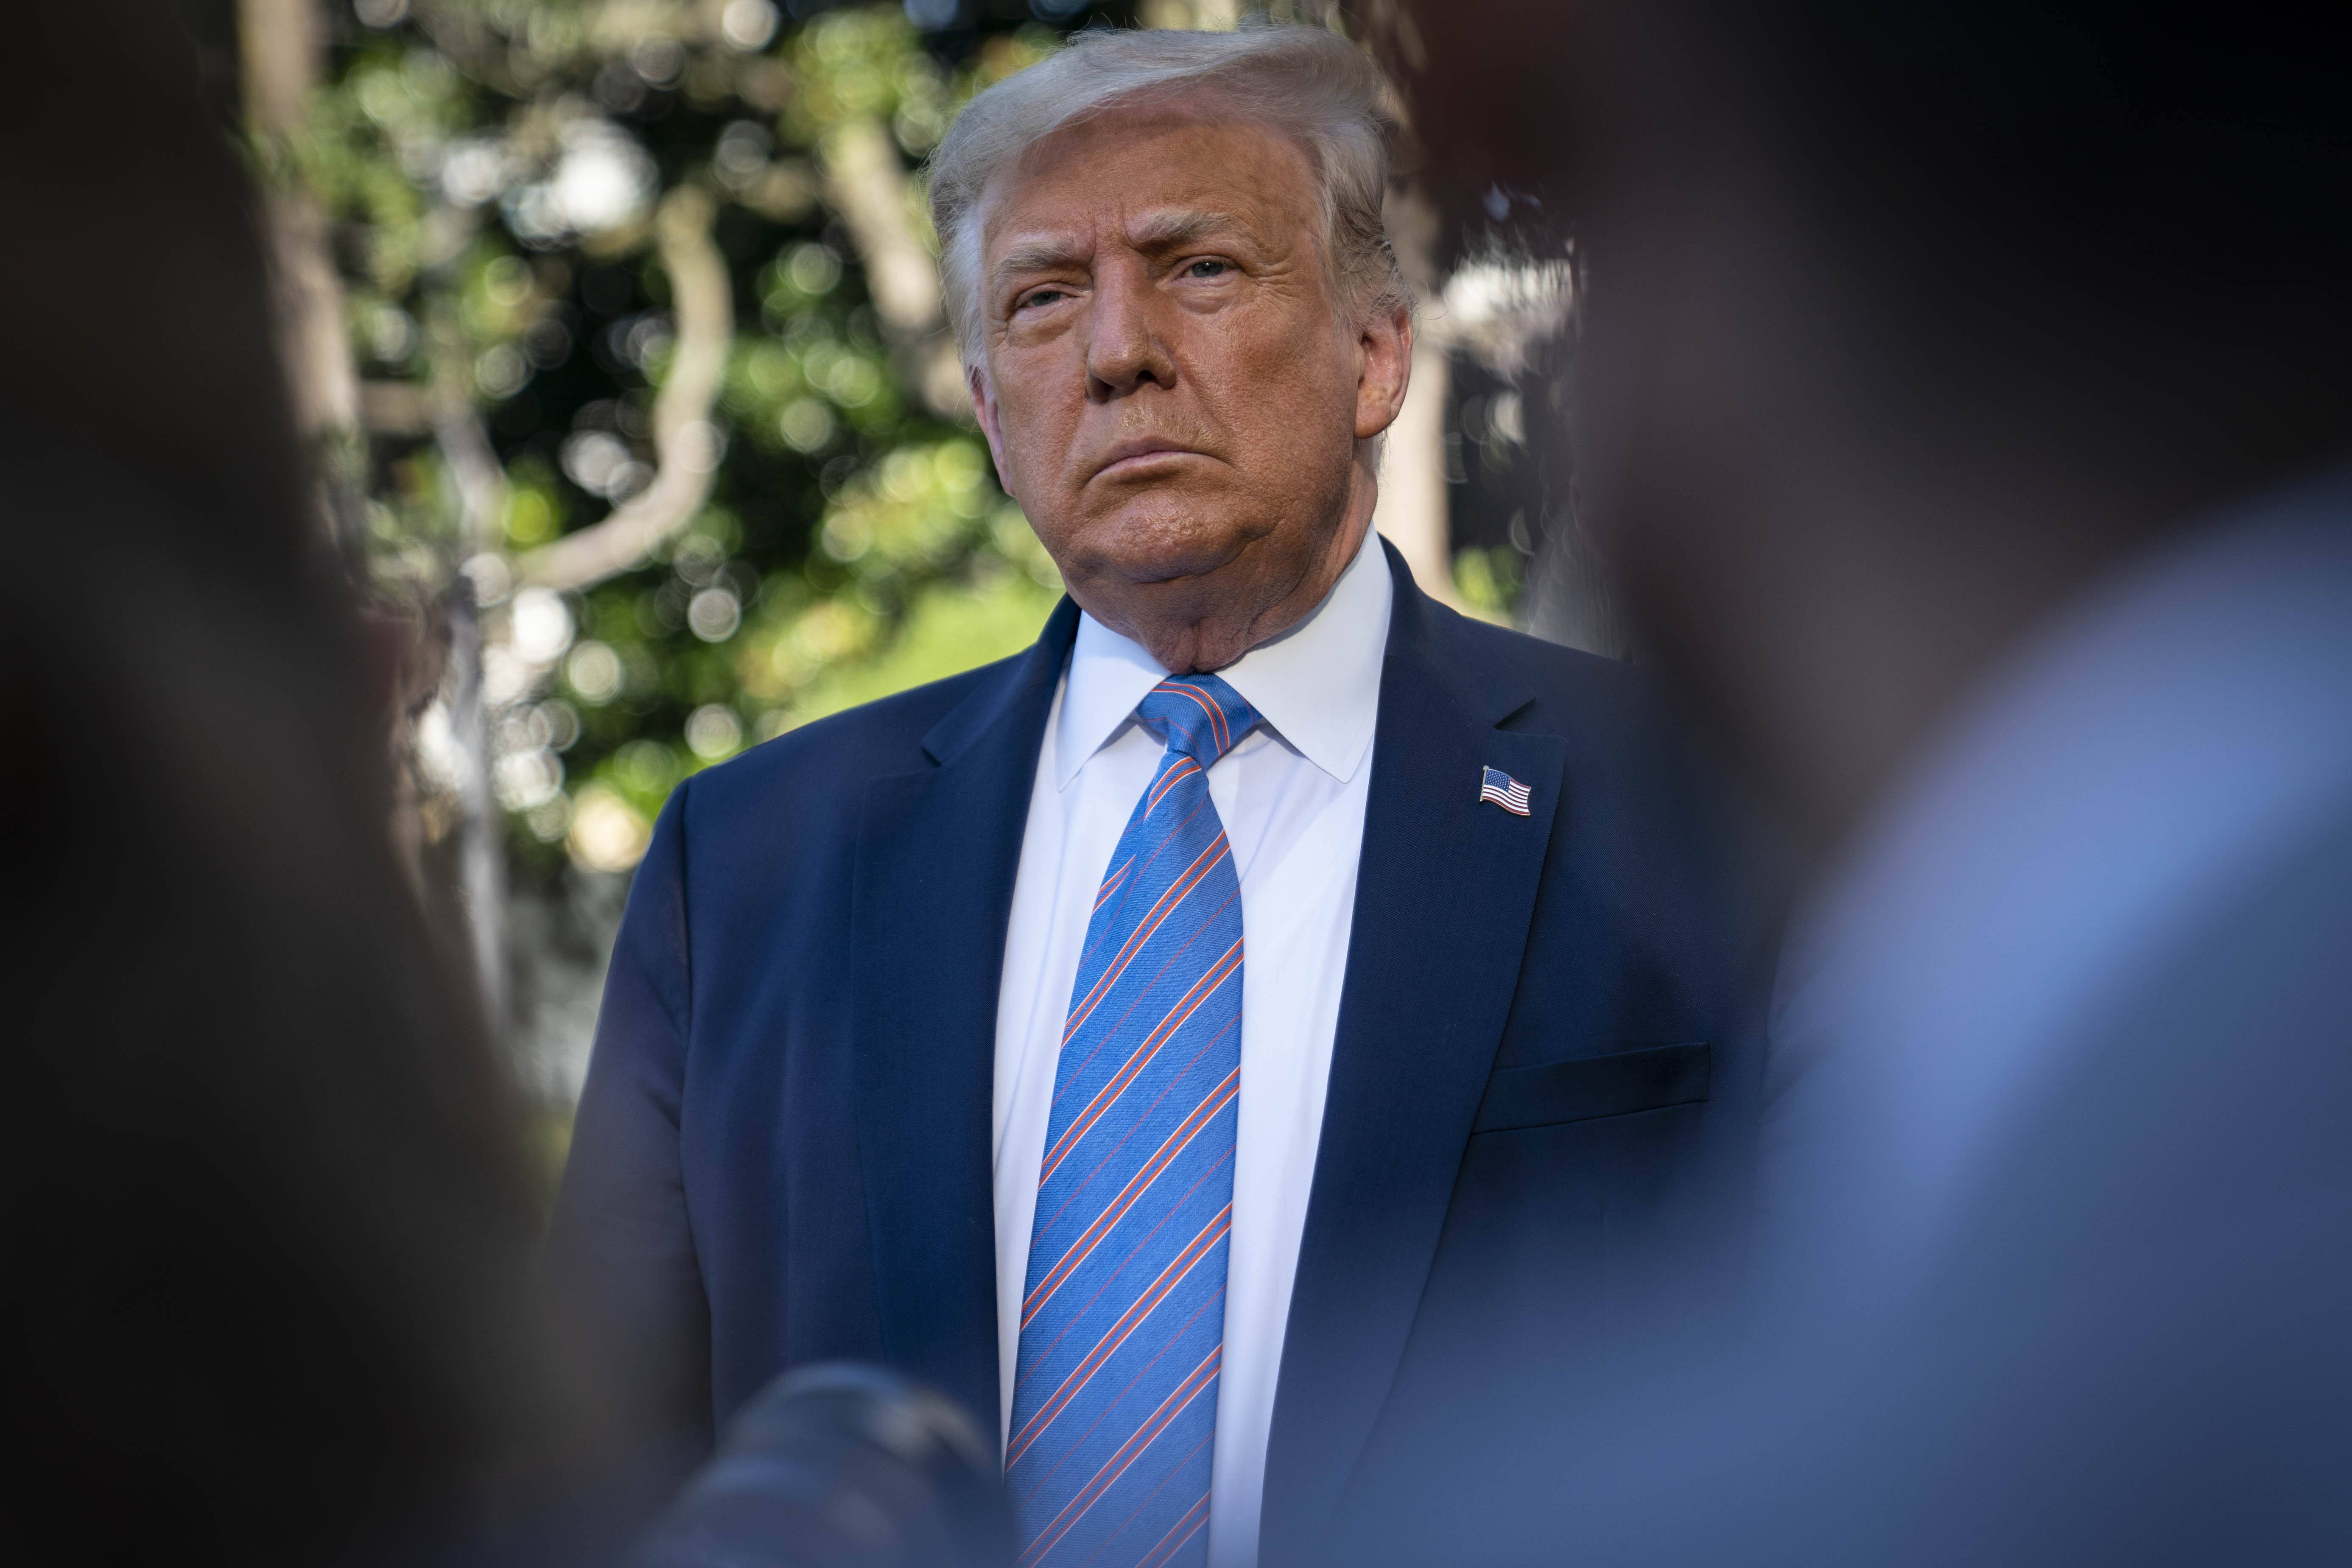 President Donald Trump speaks with members of the media on July 29 at the White House.